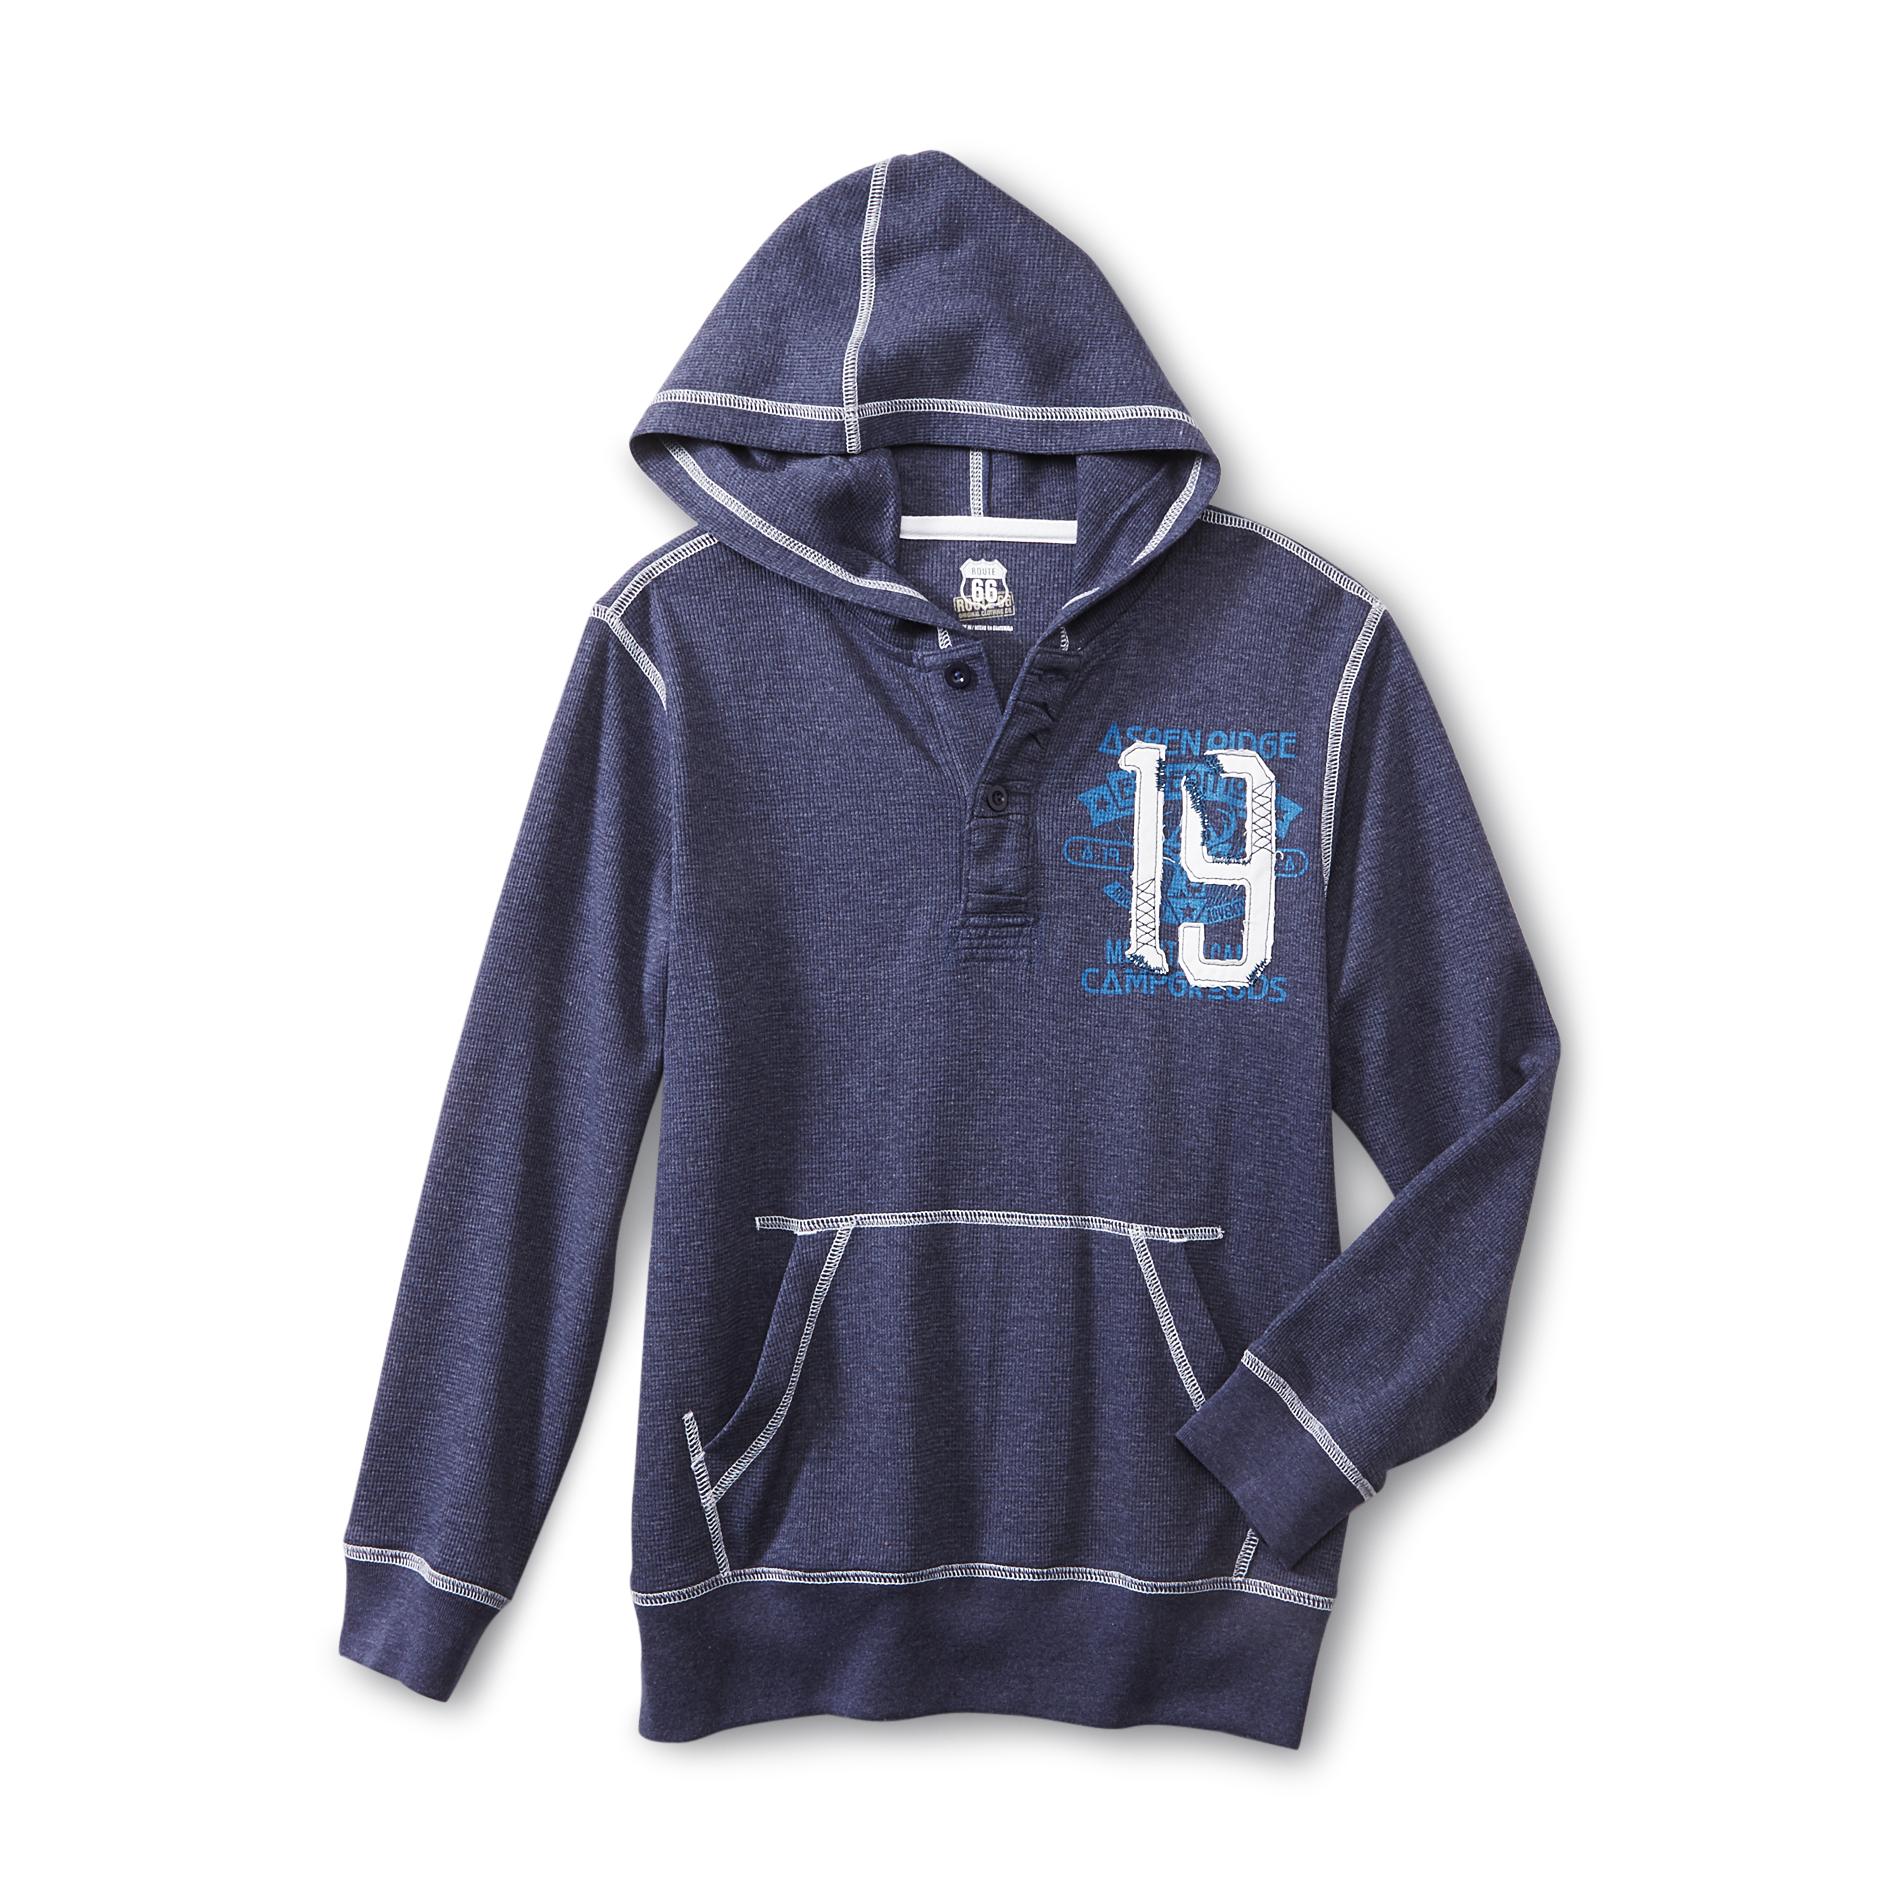 Route 66 Boy's Hooded Thermal Knit Shirt